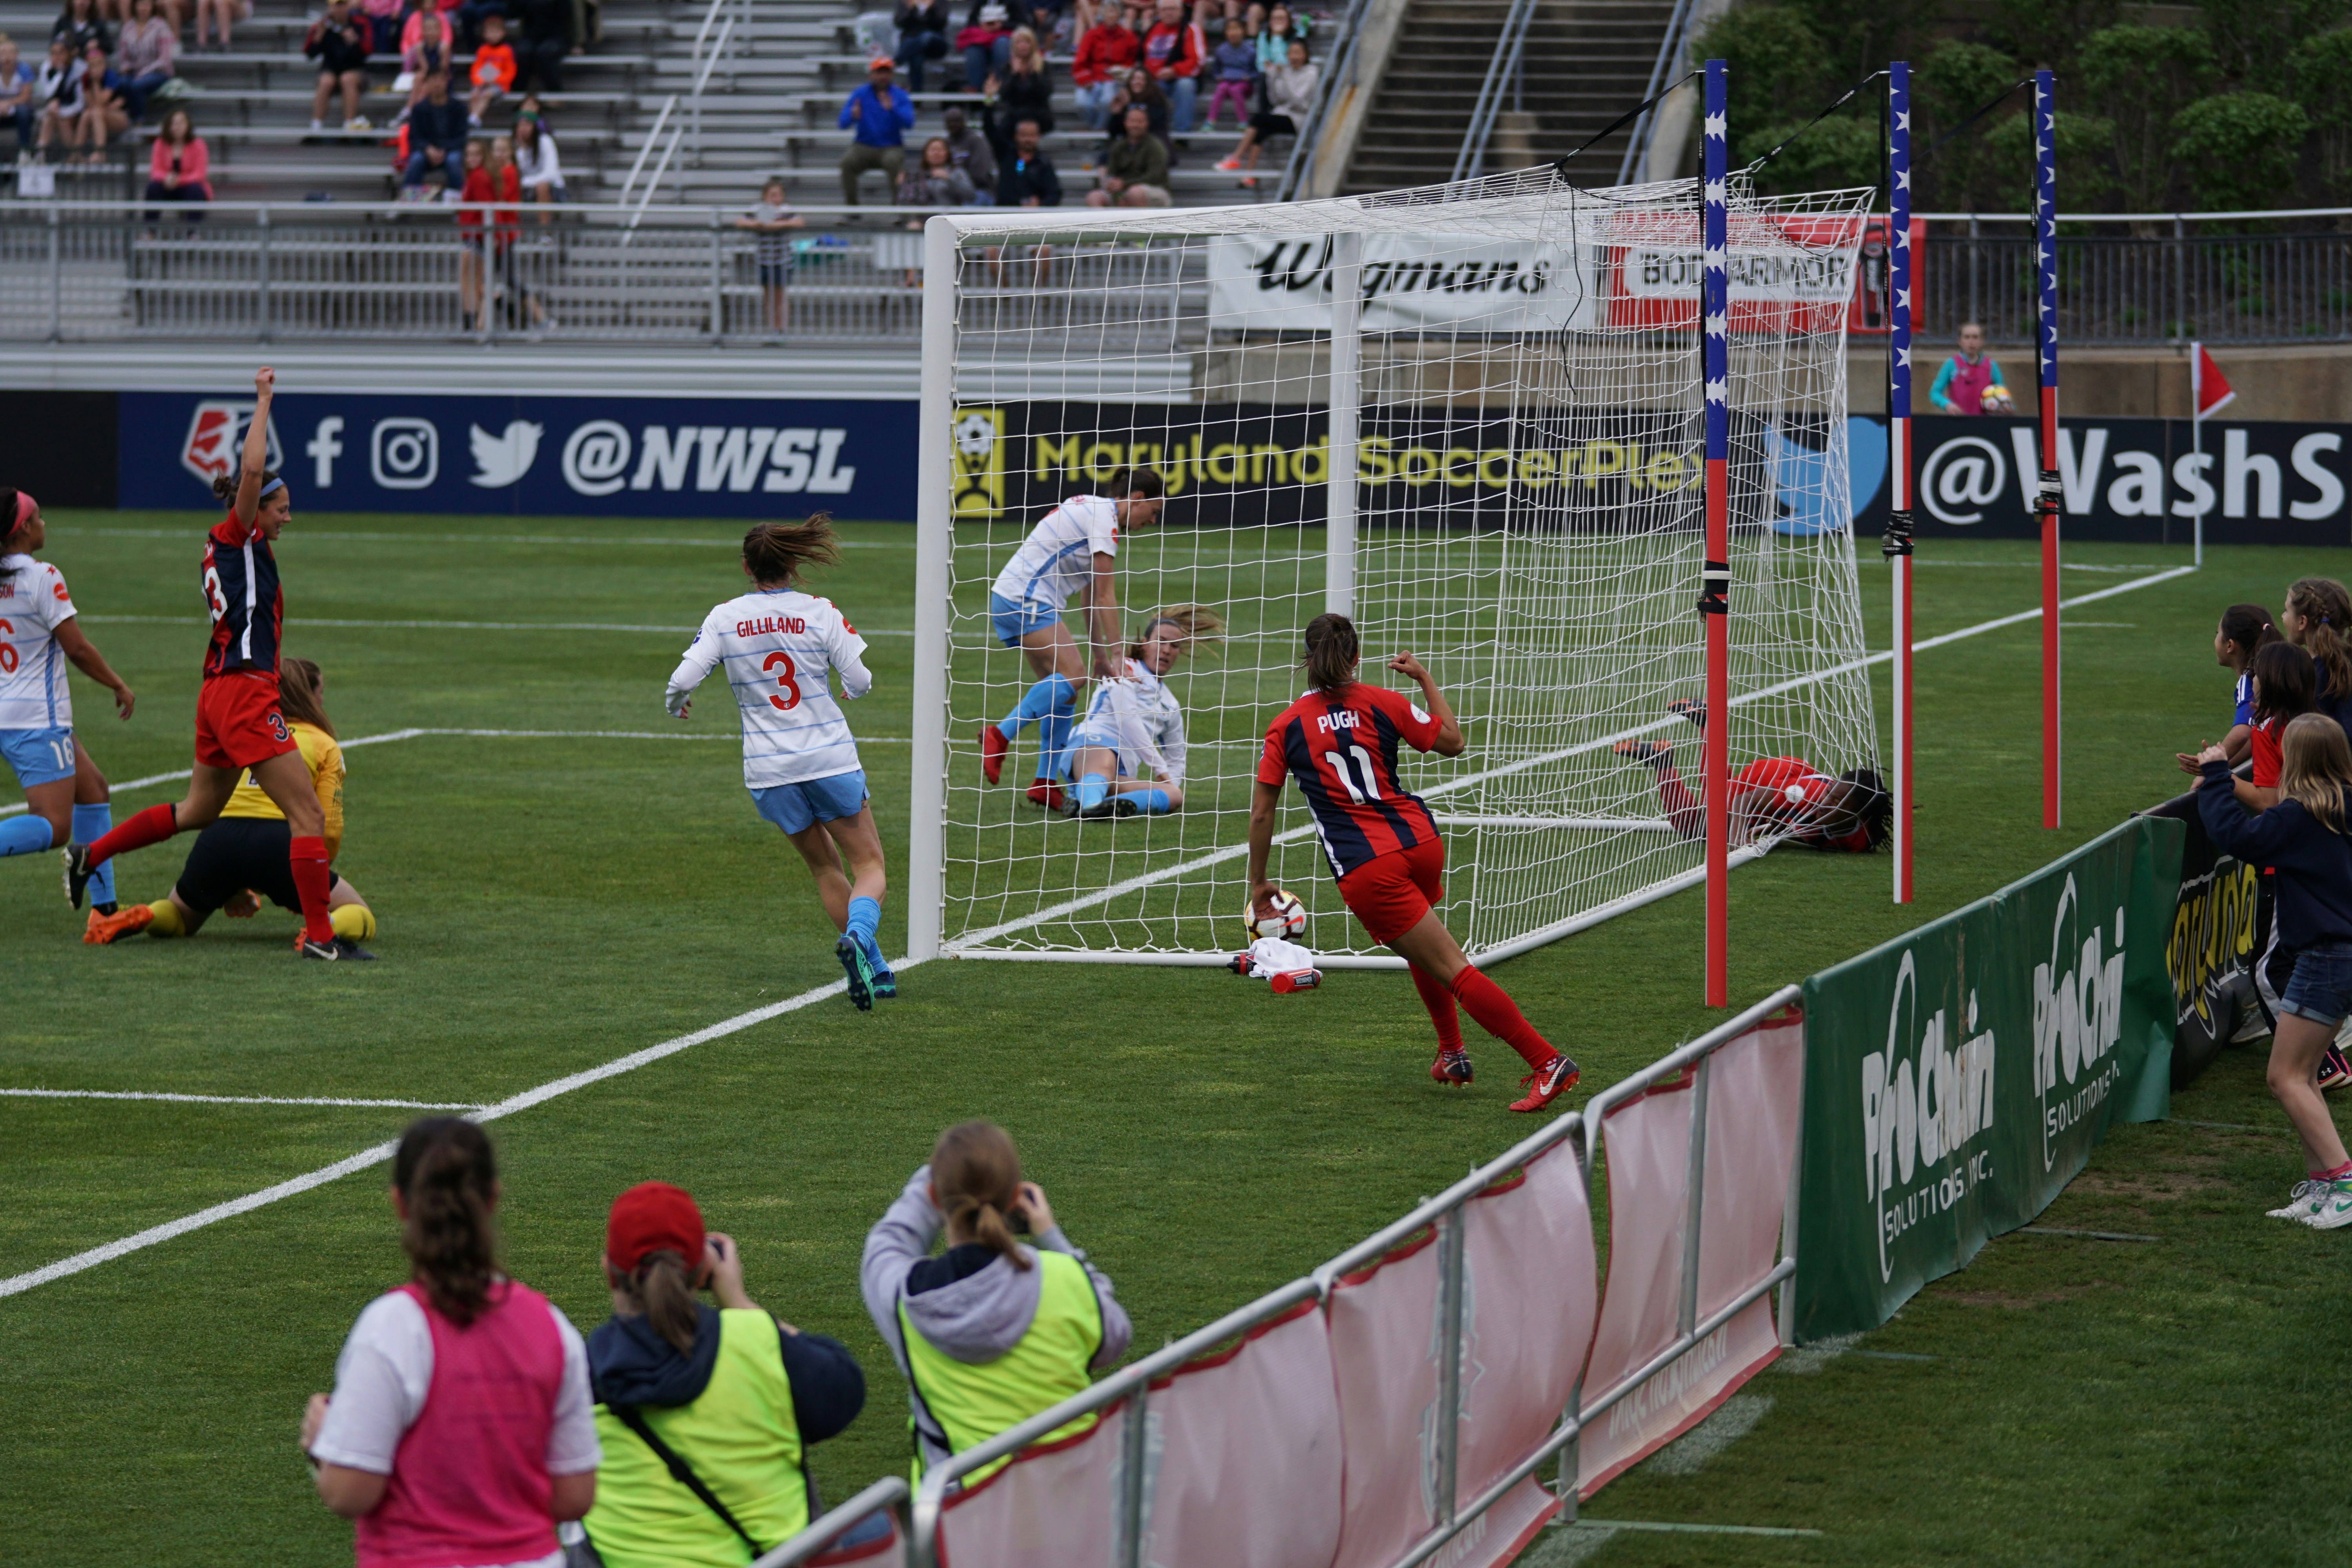 Franny Ordega scores a goal against The Chicago Red Stars at The Maryland Soccerplex. She ended up crashing into the rear of the net when it was over